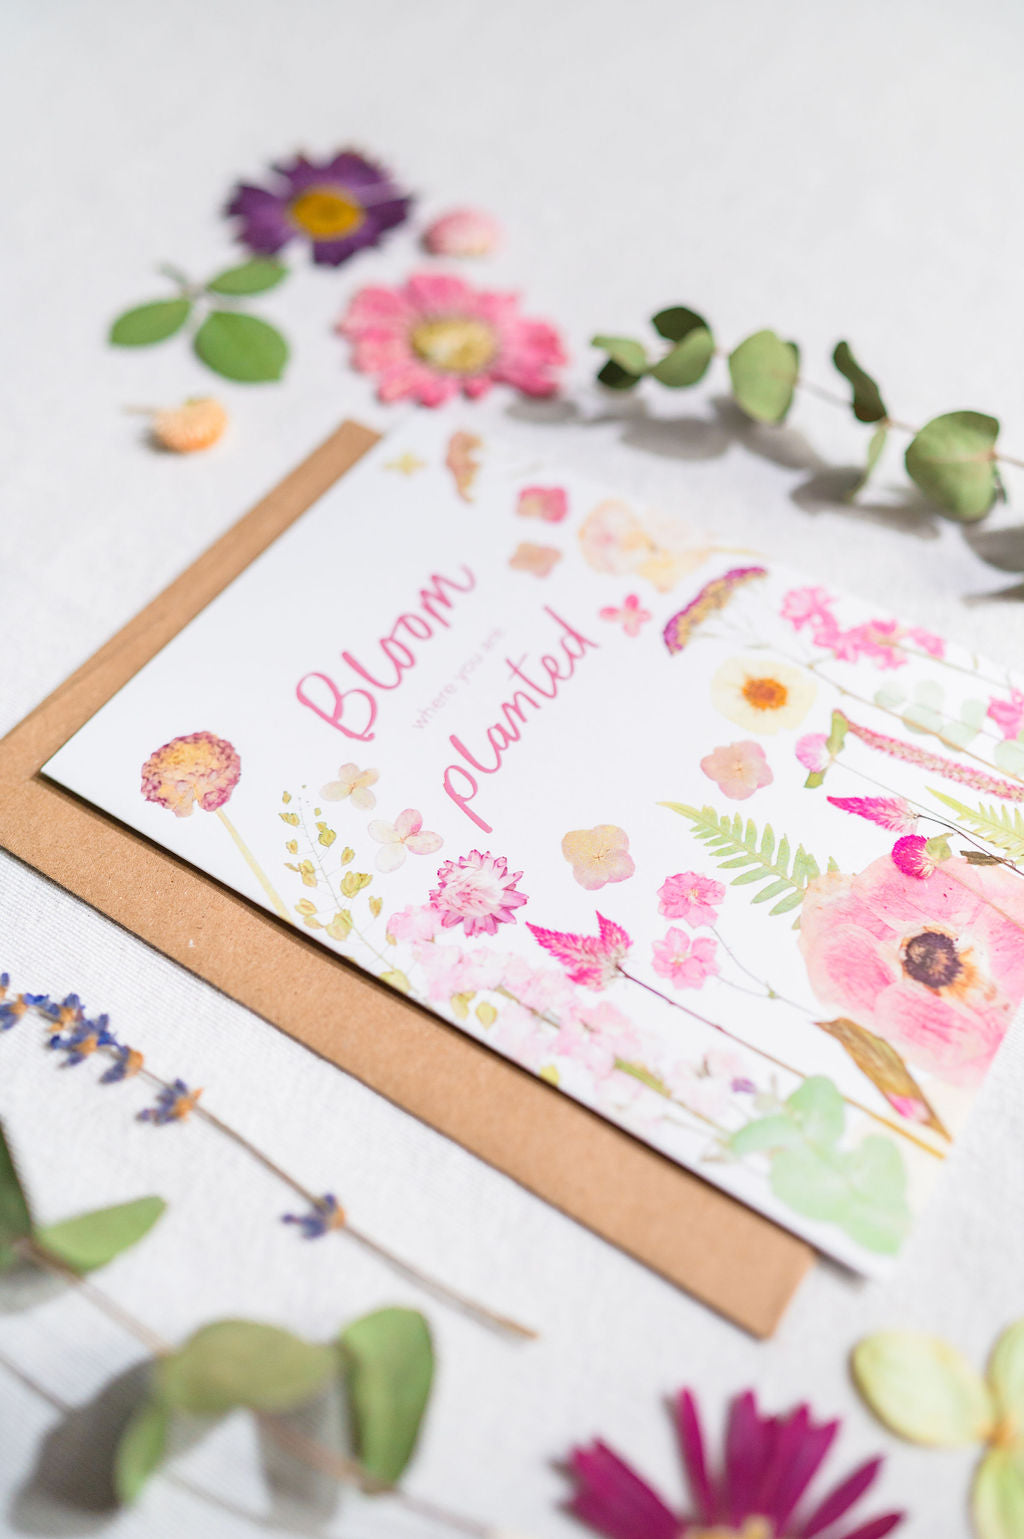 Bloom Where You Are Planted, Pink Garden of Flowers, Everyday Encouragement, Greeting Card